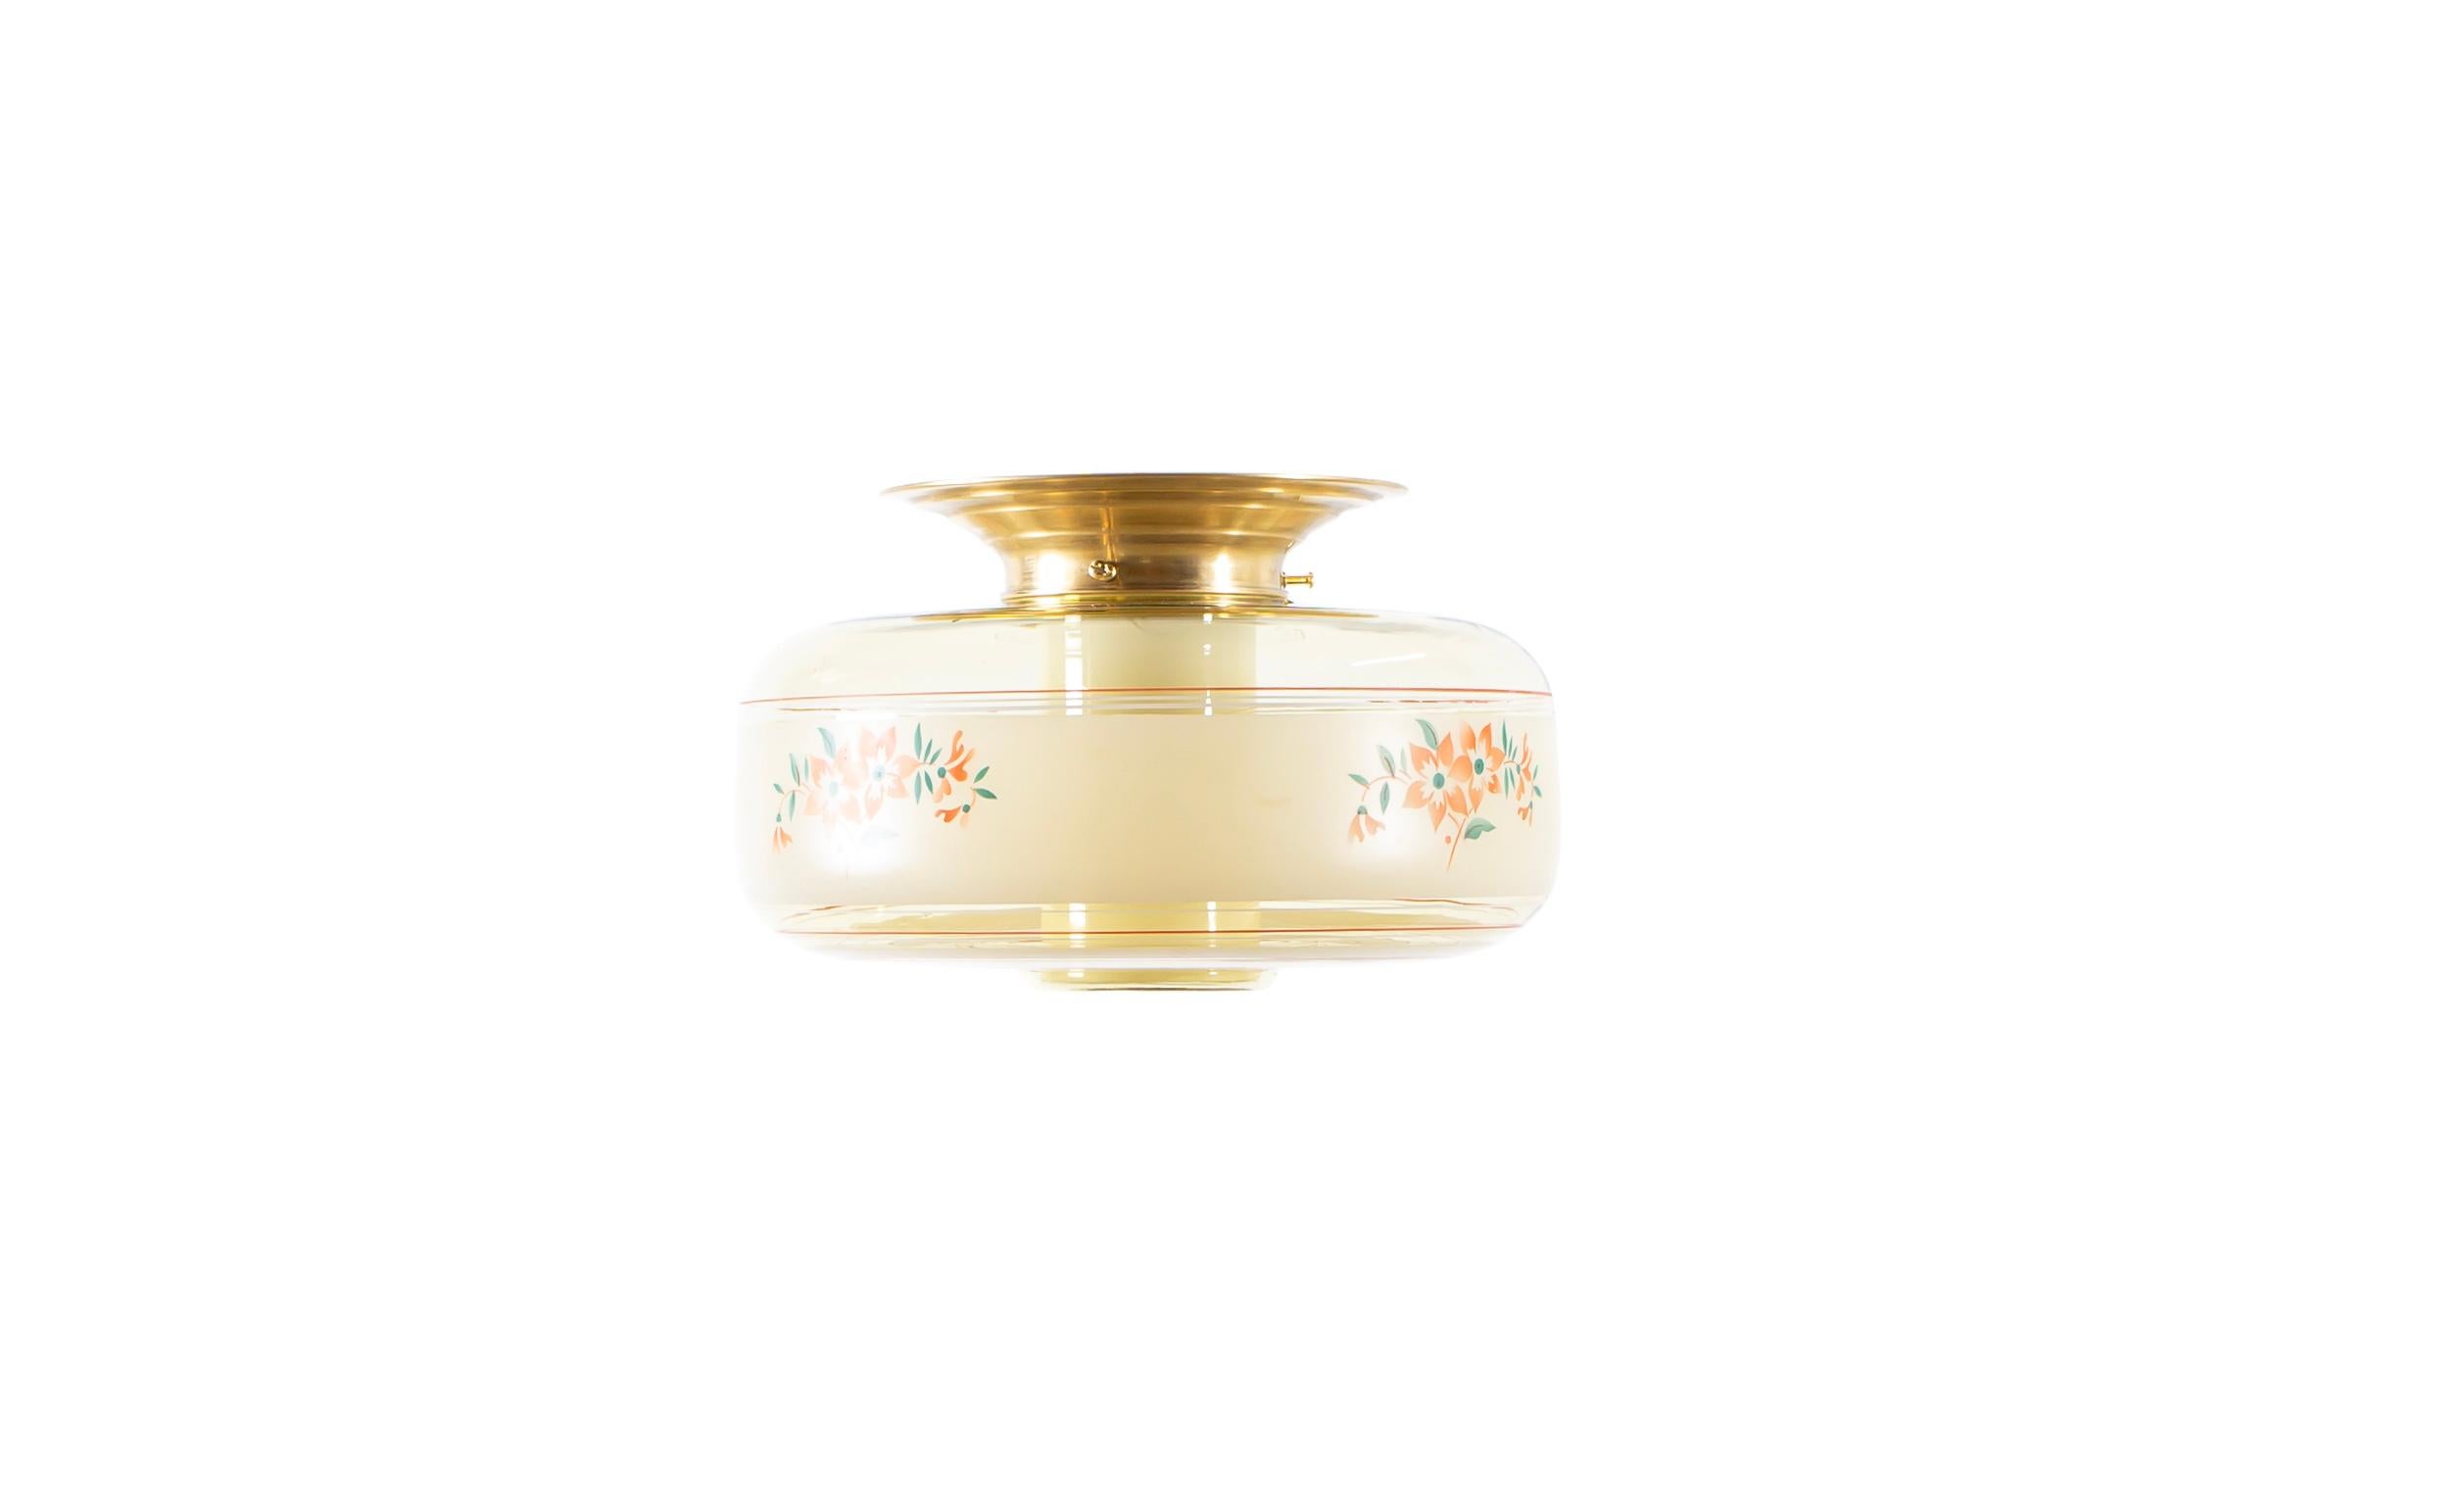 Wonderful ceiling light with hand-decorated glass shade, with an additional inner shade in opaline glass and brass metal base. Designed and made in Norway from ca 1950s first half. The lamp is fully working and in good vintage condition. It is